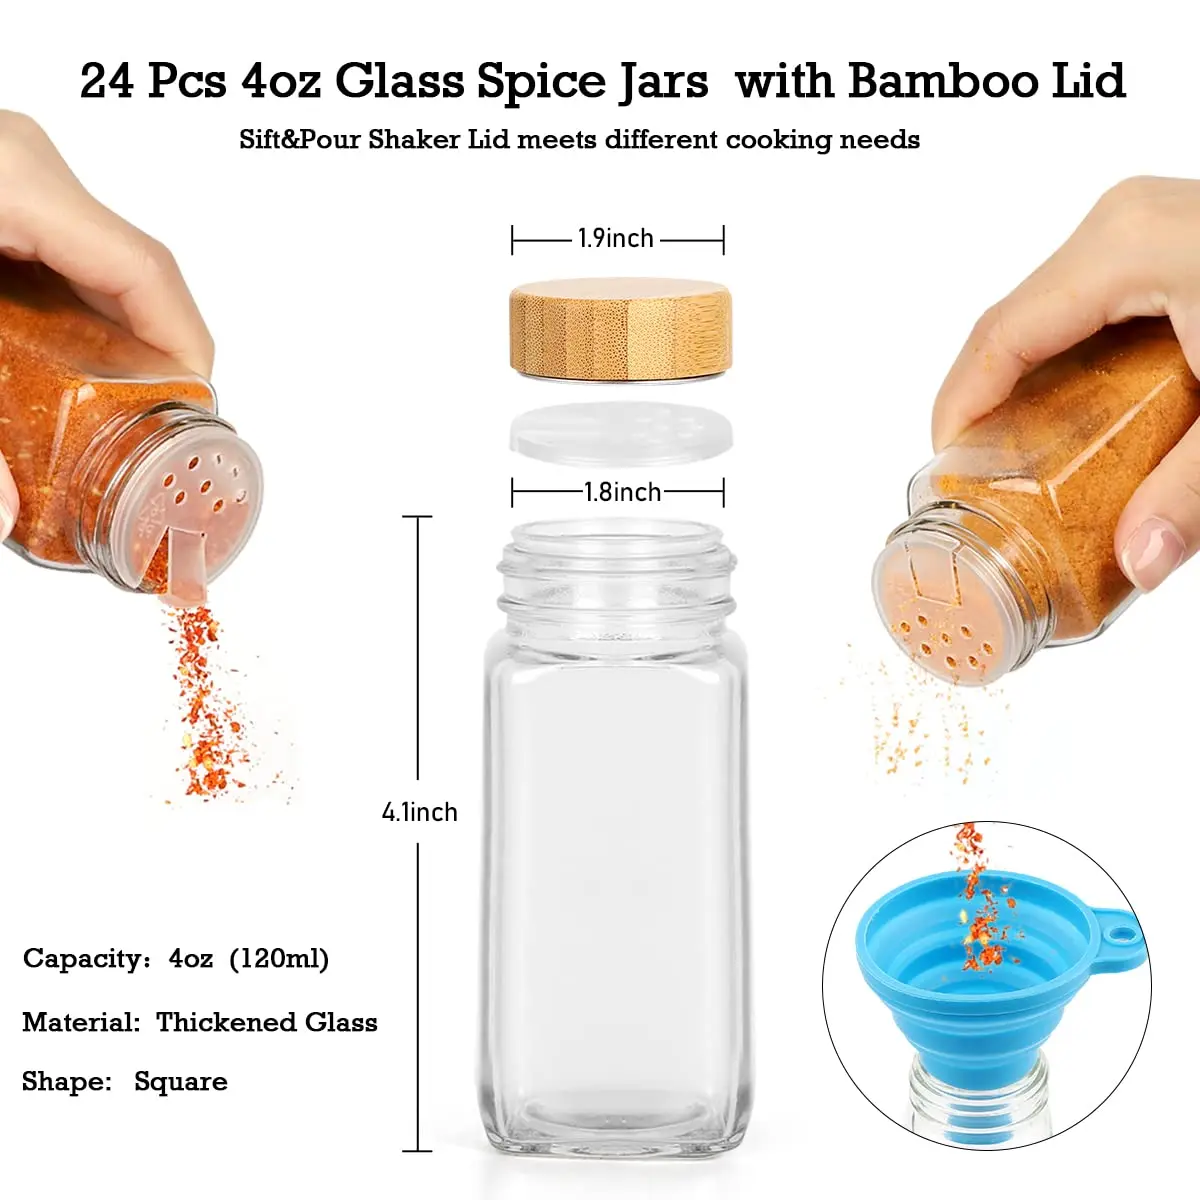 4/12Pcs Glass Spice Jars with Bamboo Lid Spice Seasoning